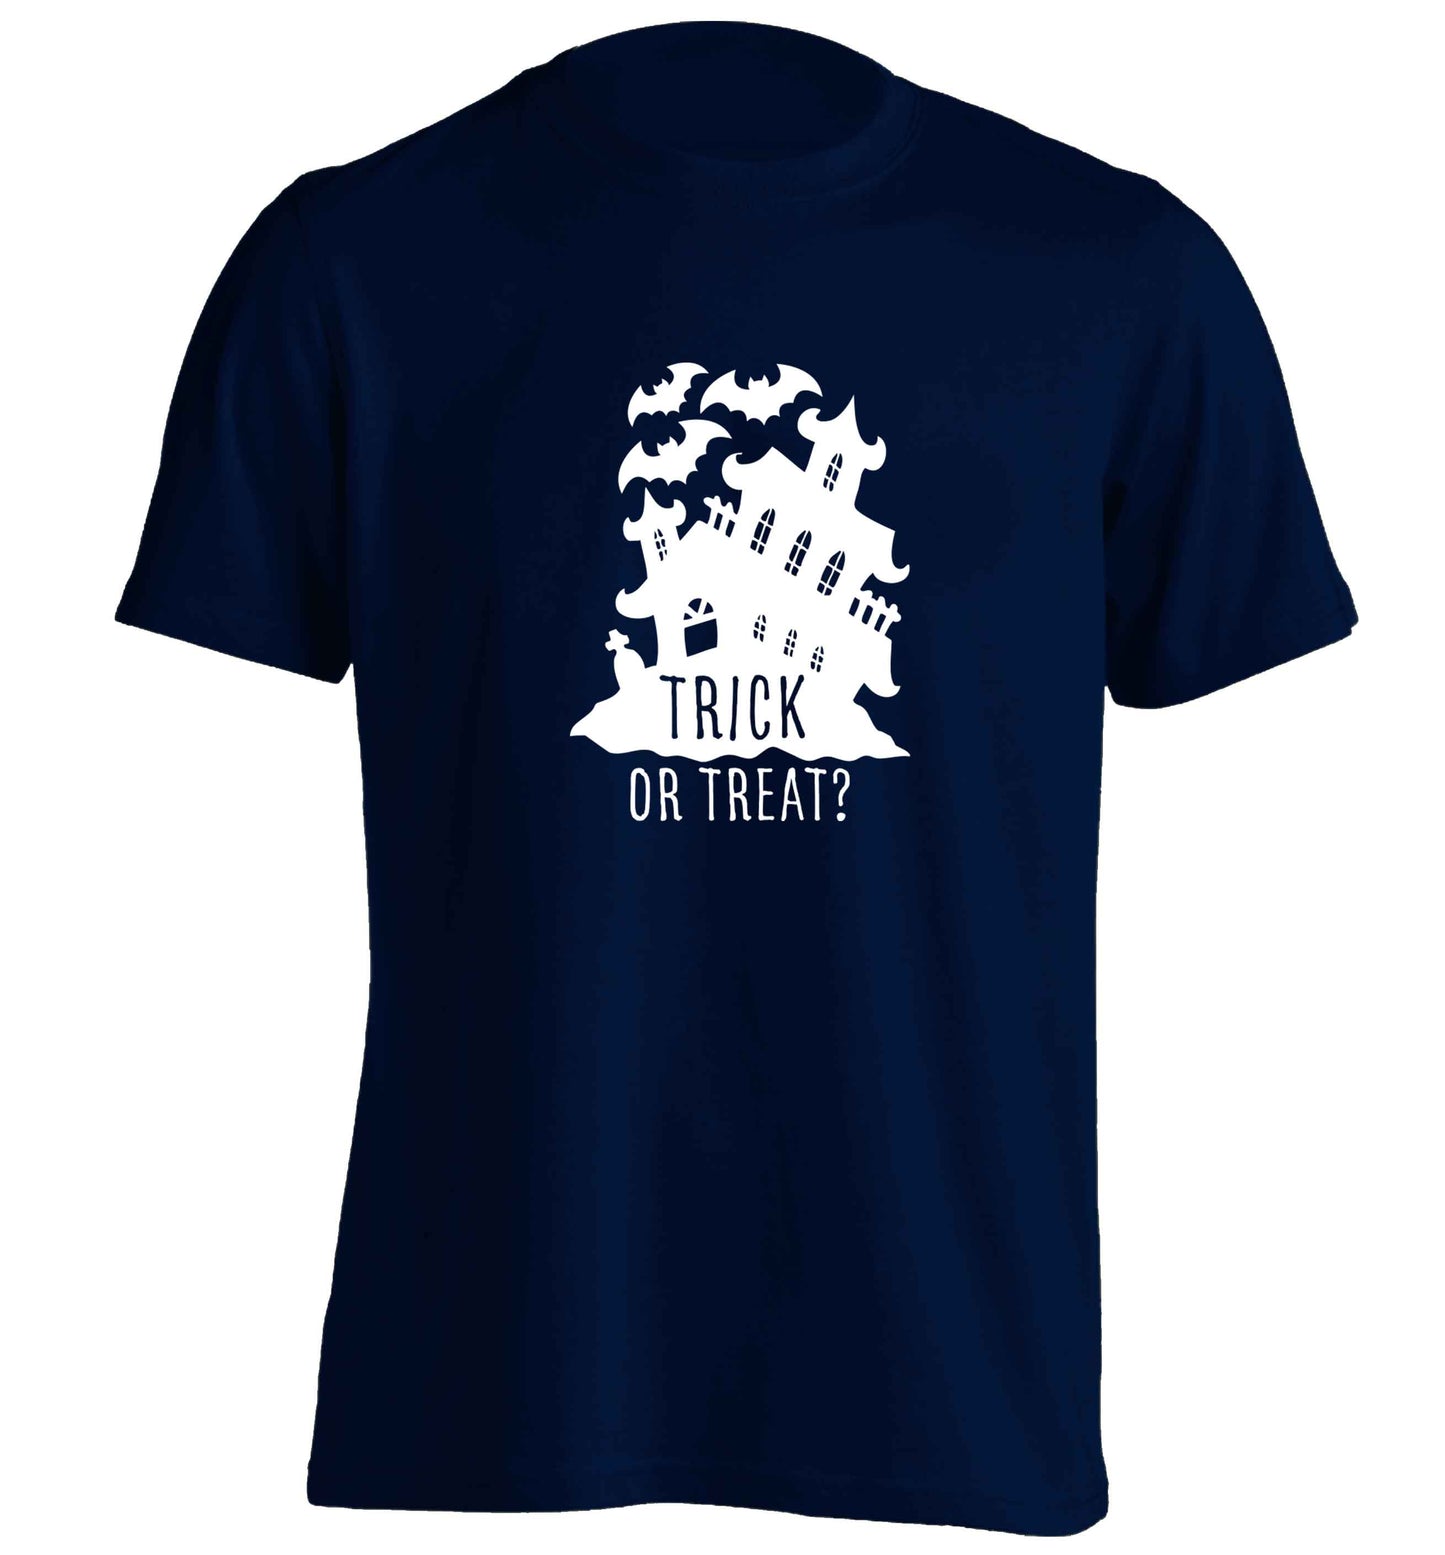 Trick or treat - haunted house adults unisex navy Tshirt 2XL